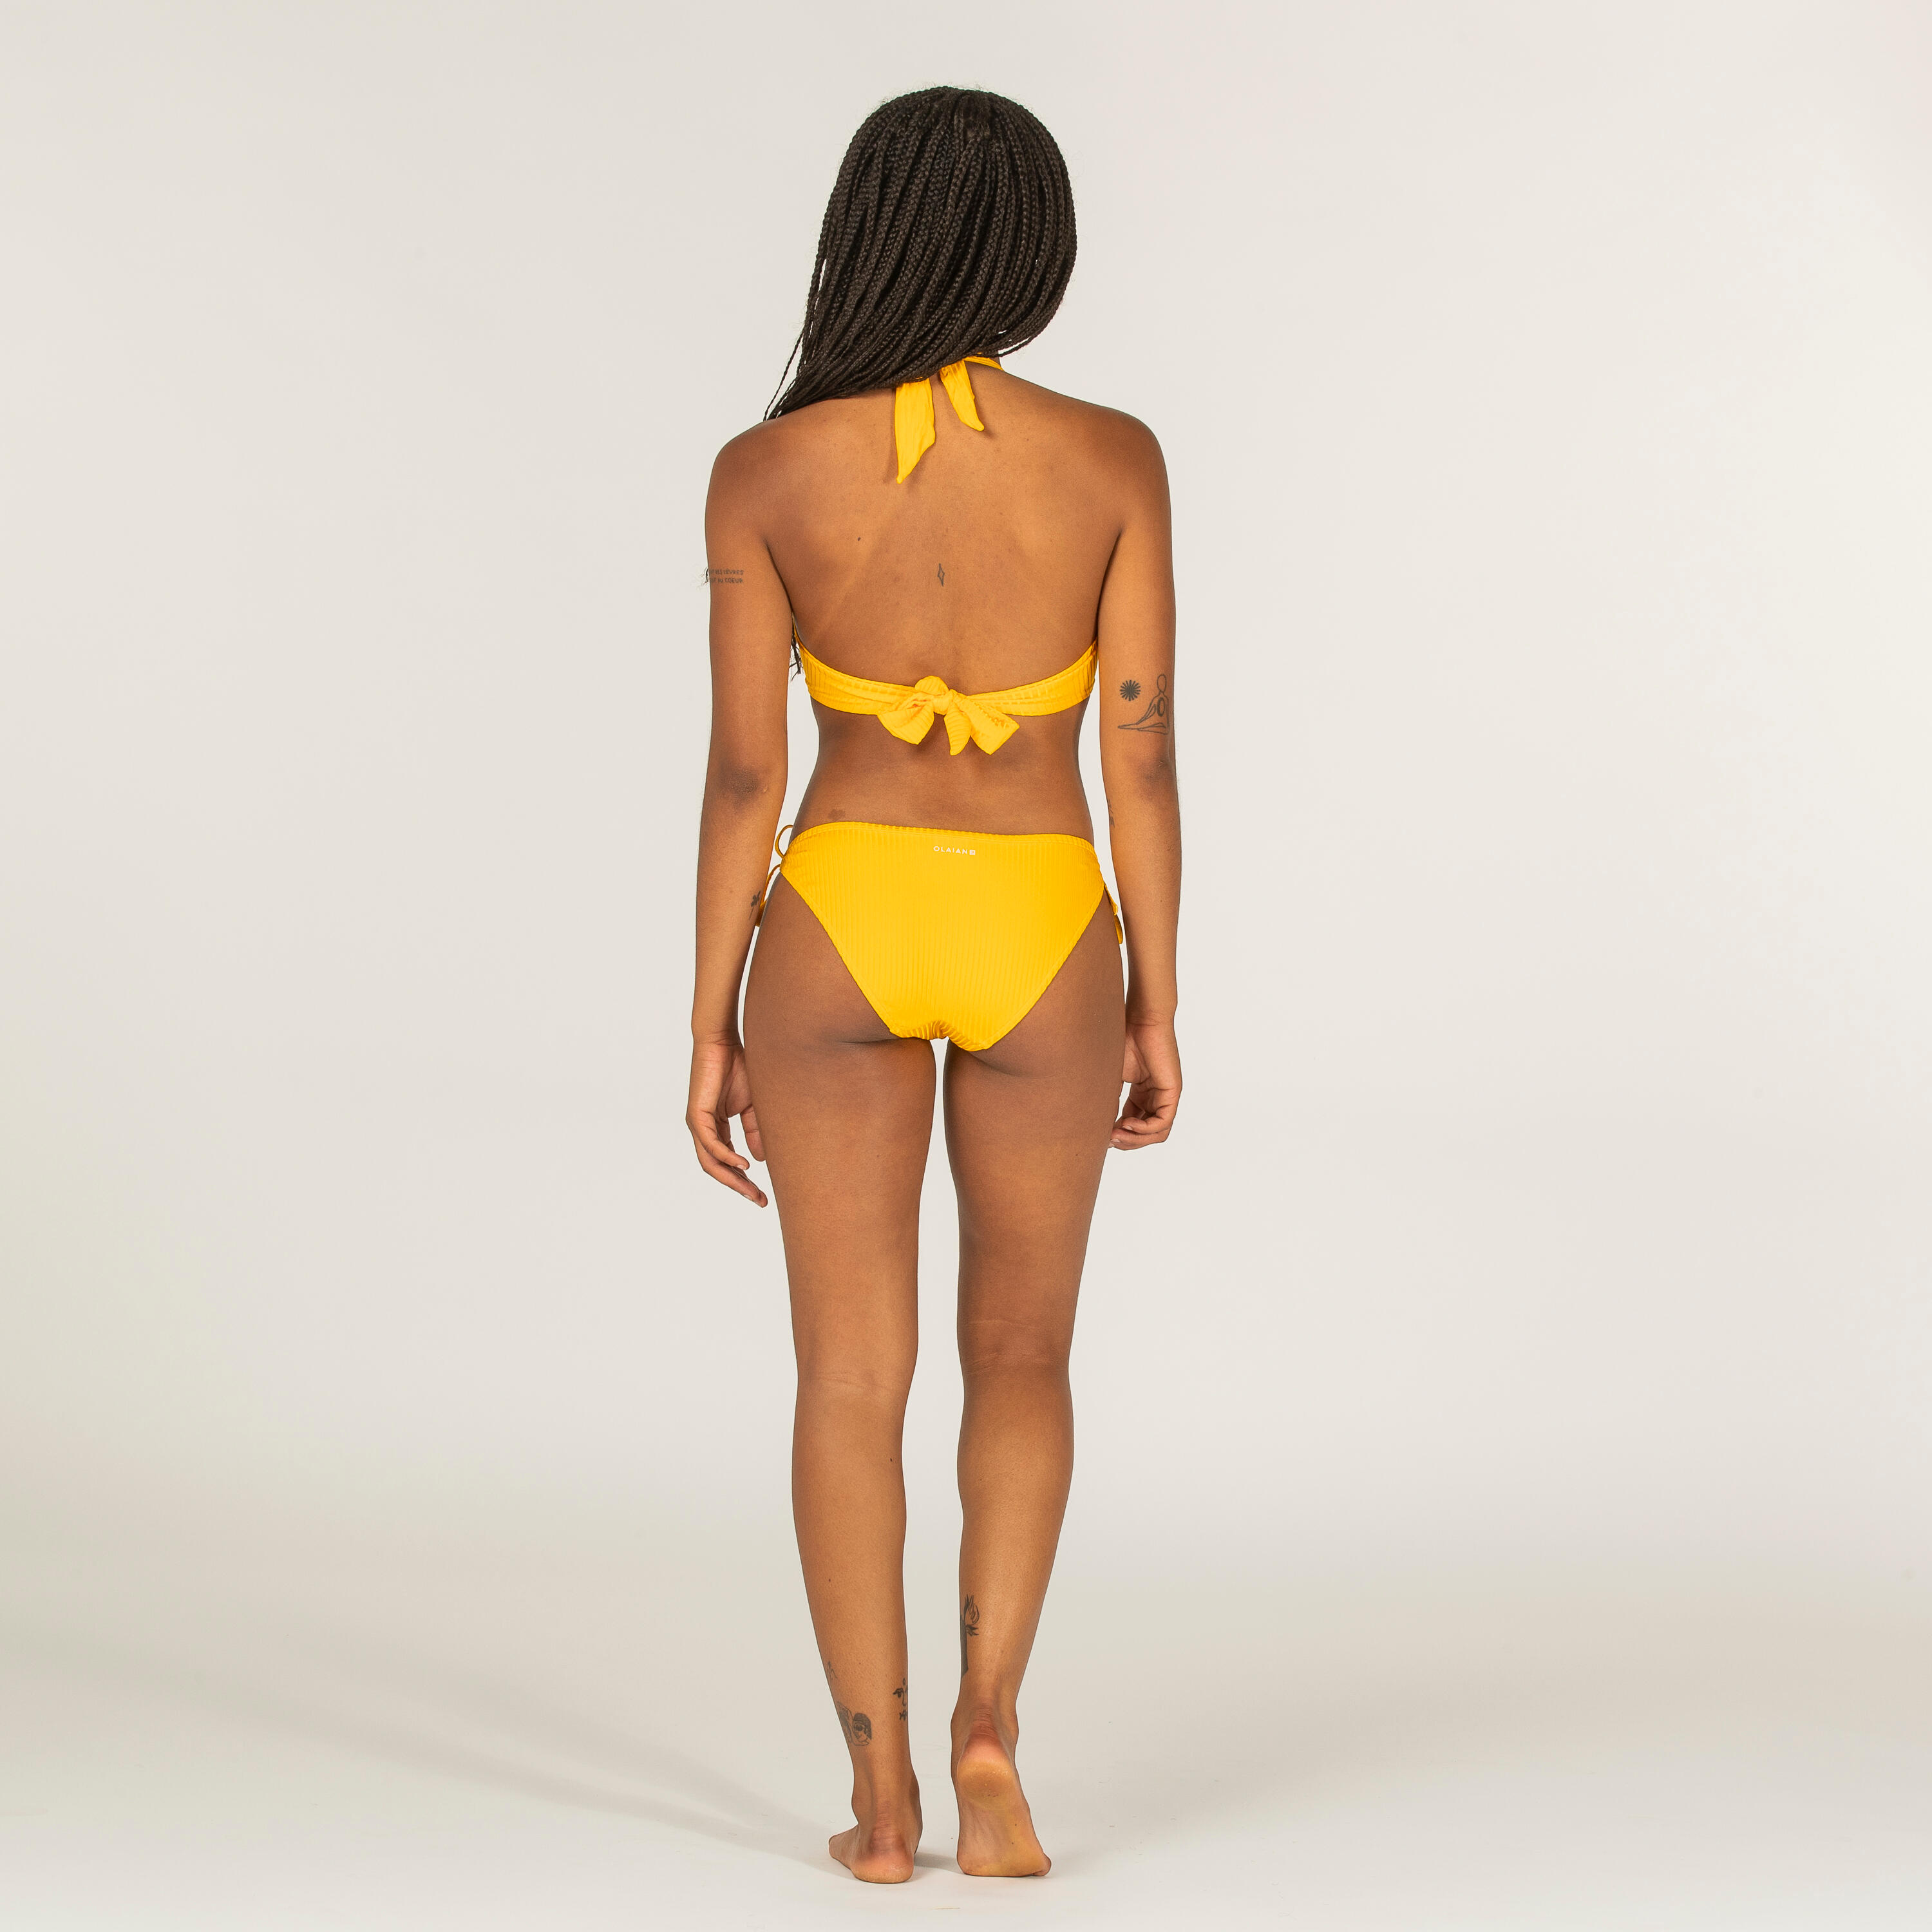 Women's push-up swimsuit top with fixed ribbed cups ELENA PLAIN YELLOW 8/9